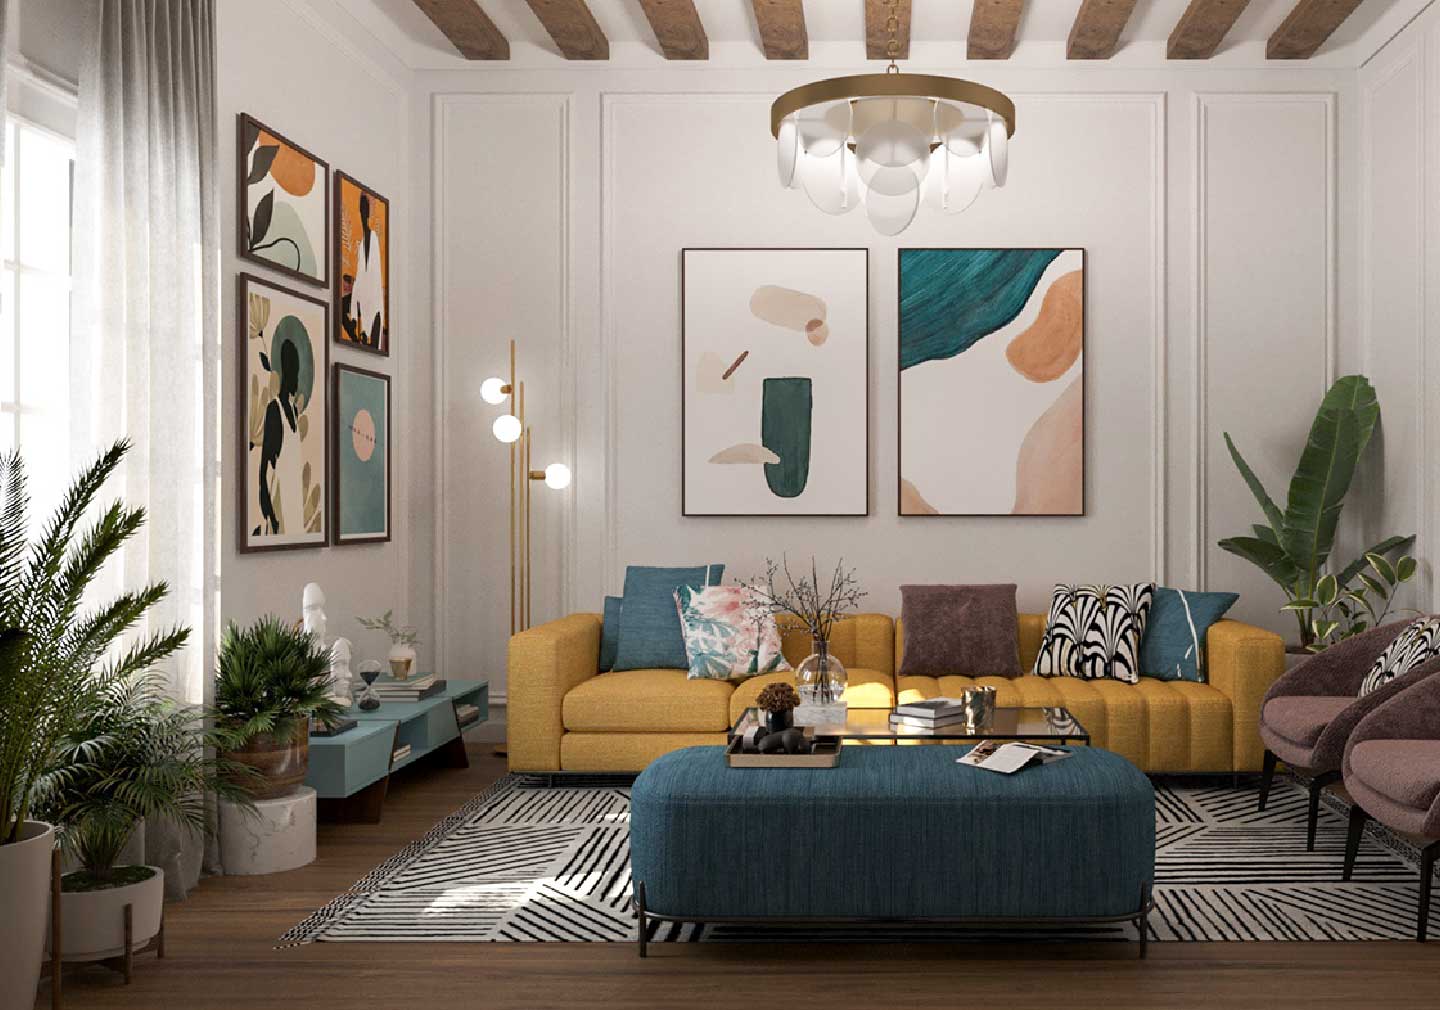 Choosing the Right Color Scheme for living room interior designs